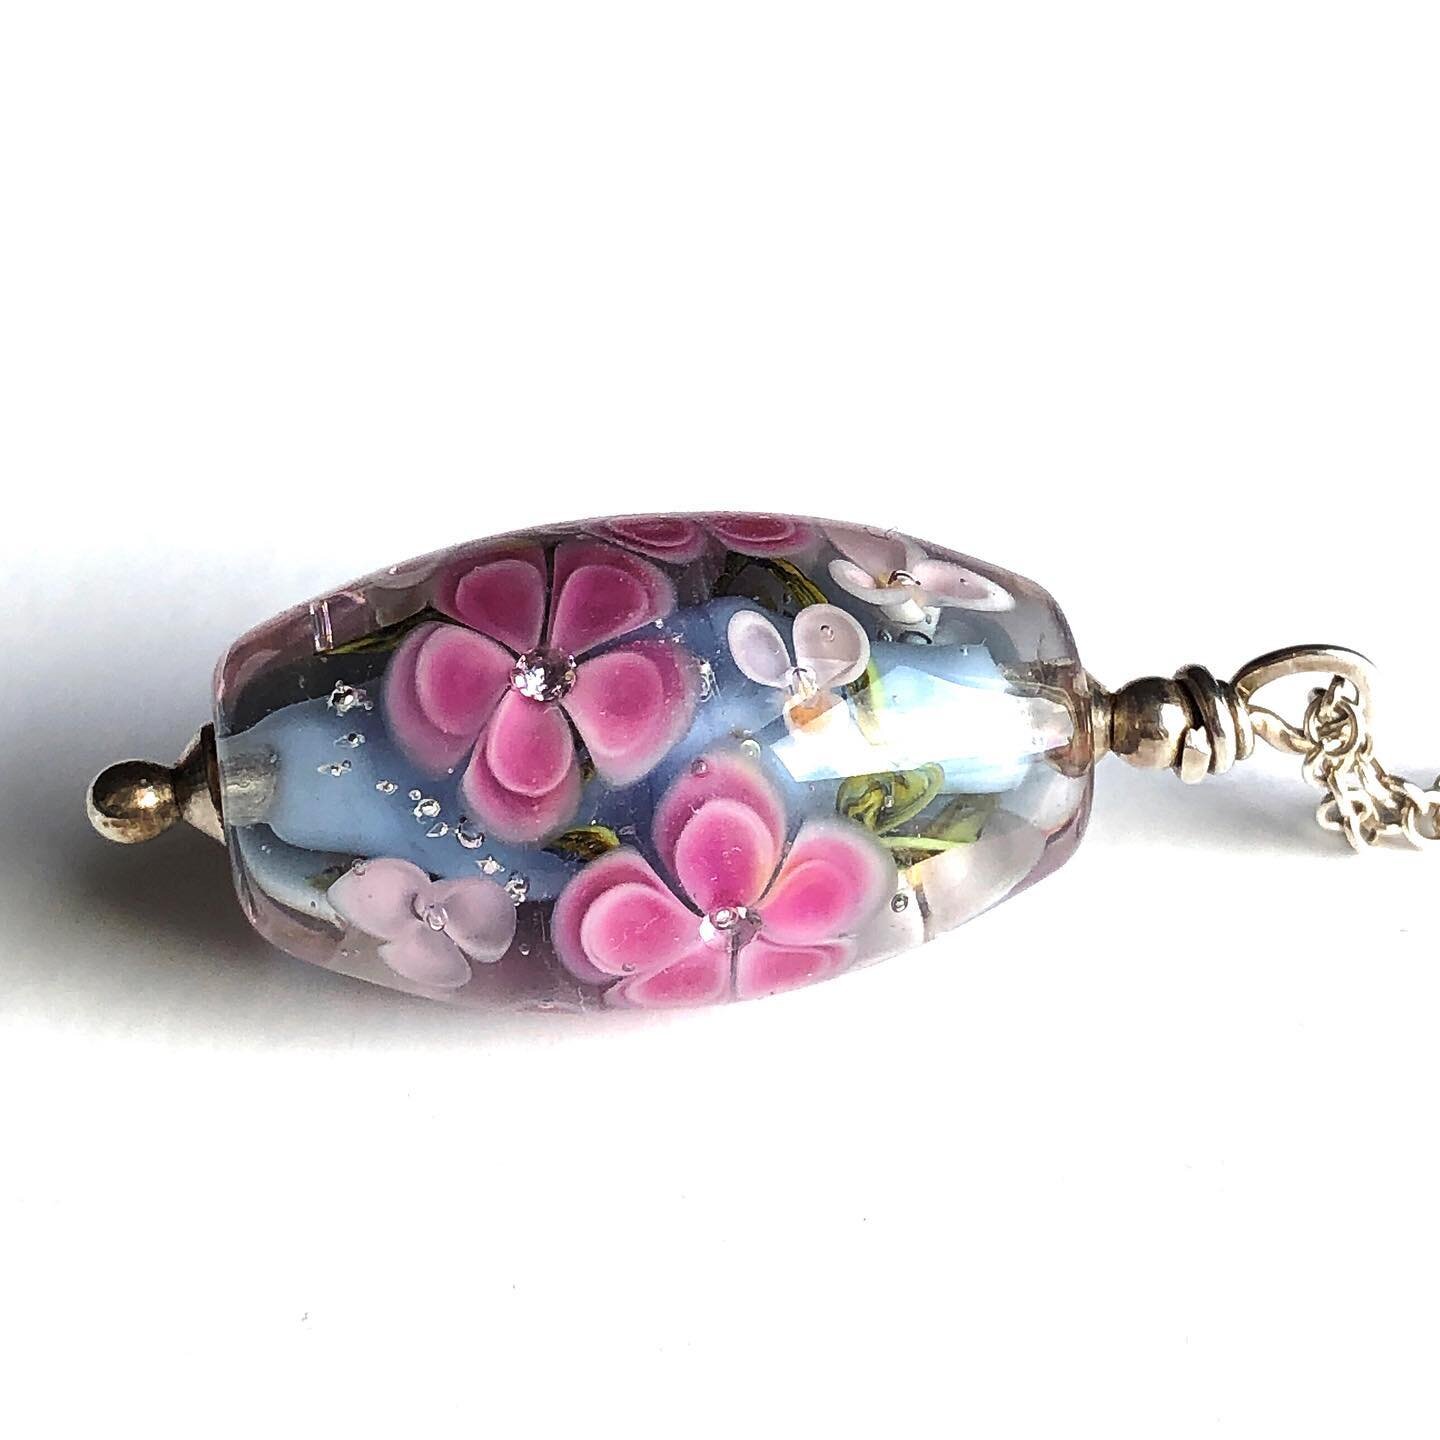 I don&rsquo;t think I have ever posted this one before. This is my necklace, the one I wear every day. I love the pink flowers against this particular shade of blue grey (my favourite!). I love the way the clear glass magnifies the ridiculously spark